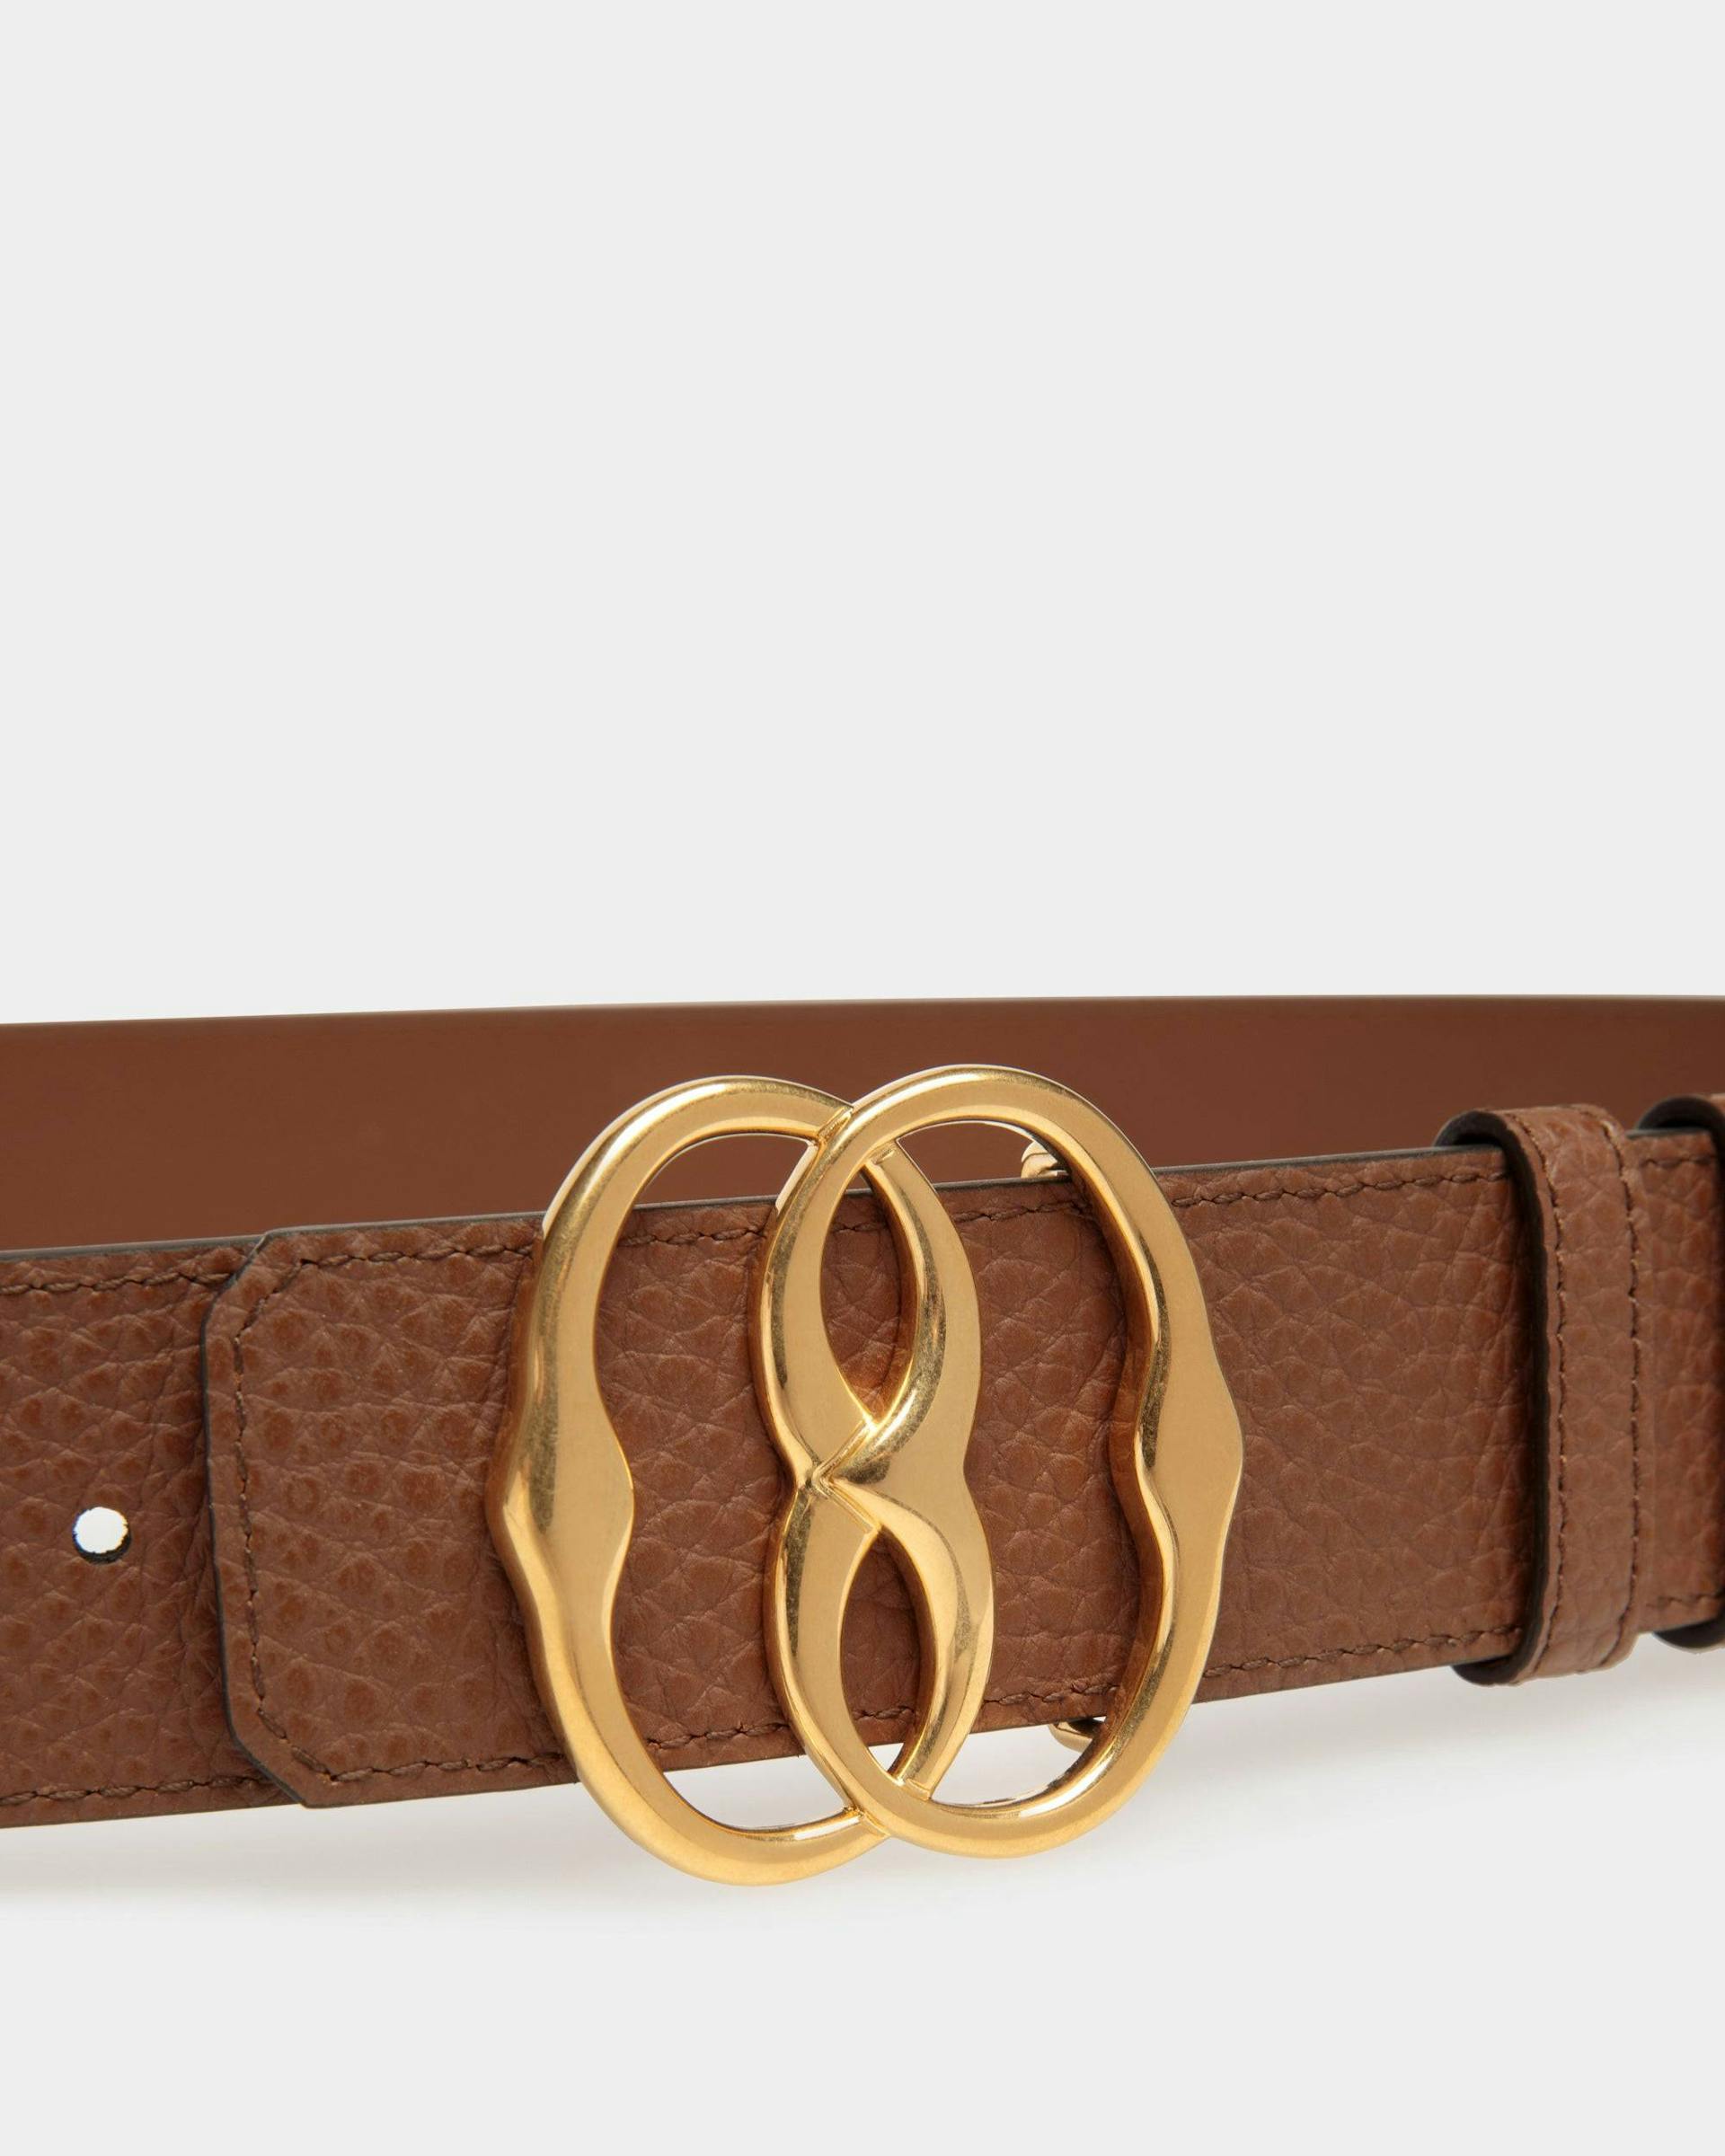 Bally Iconic 35mm Belt In Brown Leather - Men's - Bally - 03